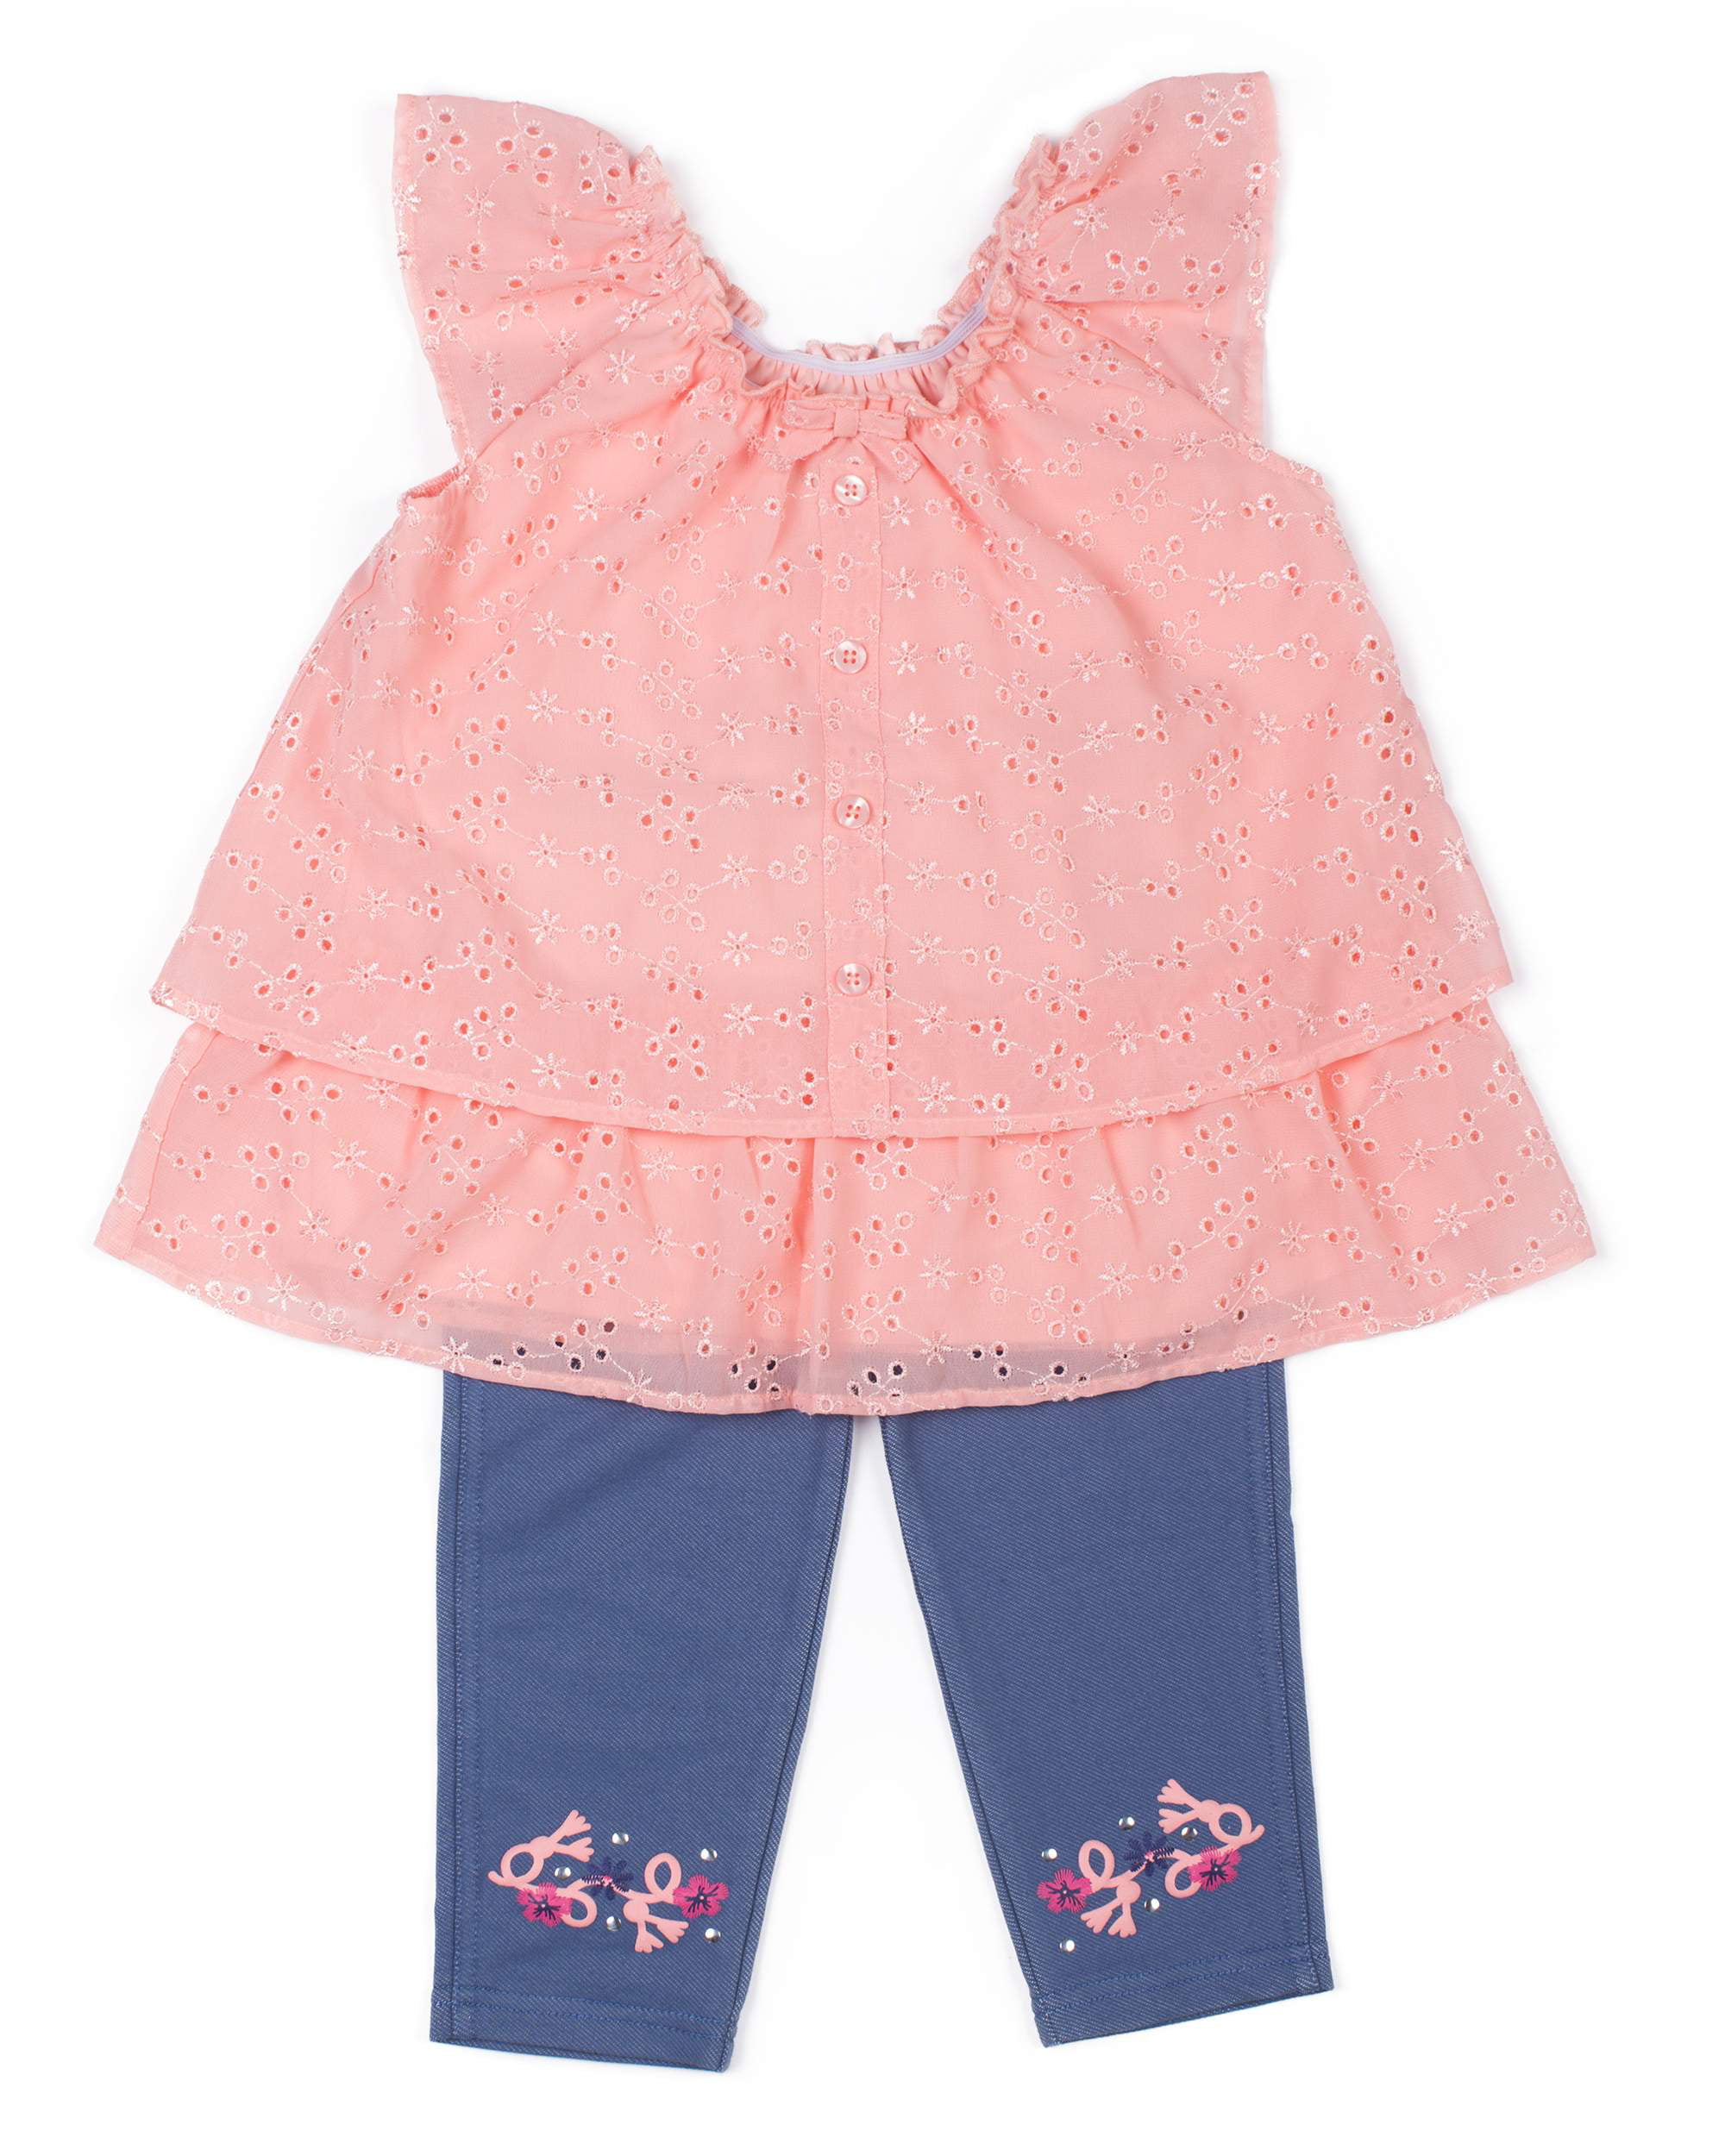 Toddler Girls' Layered Lace Top & Jeggings, 2pc Outfit Set - Walmart.com